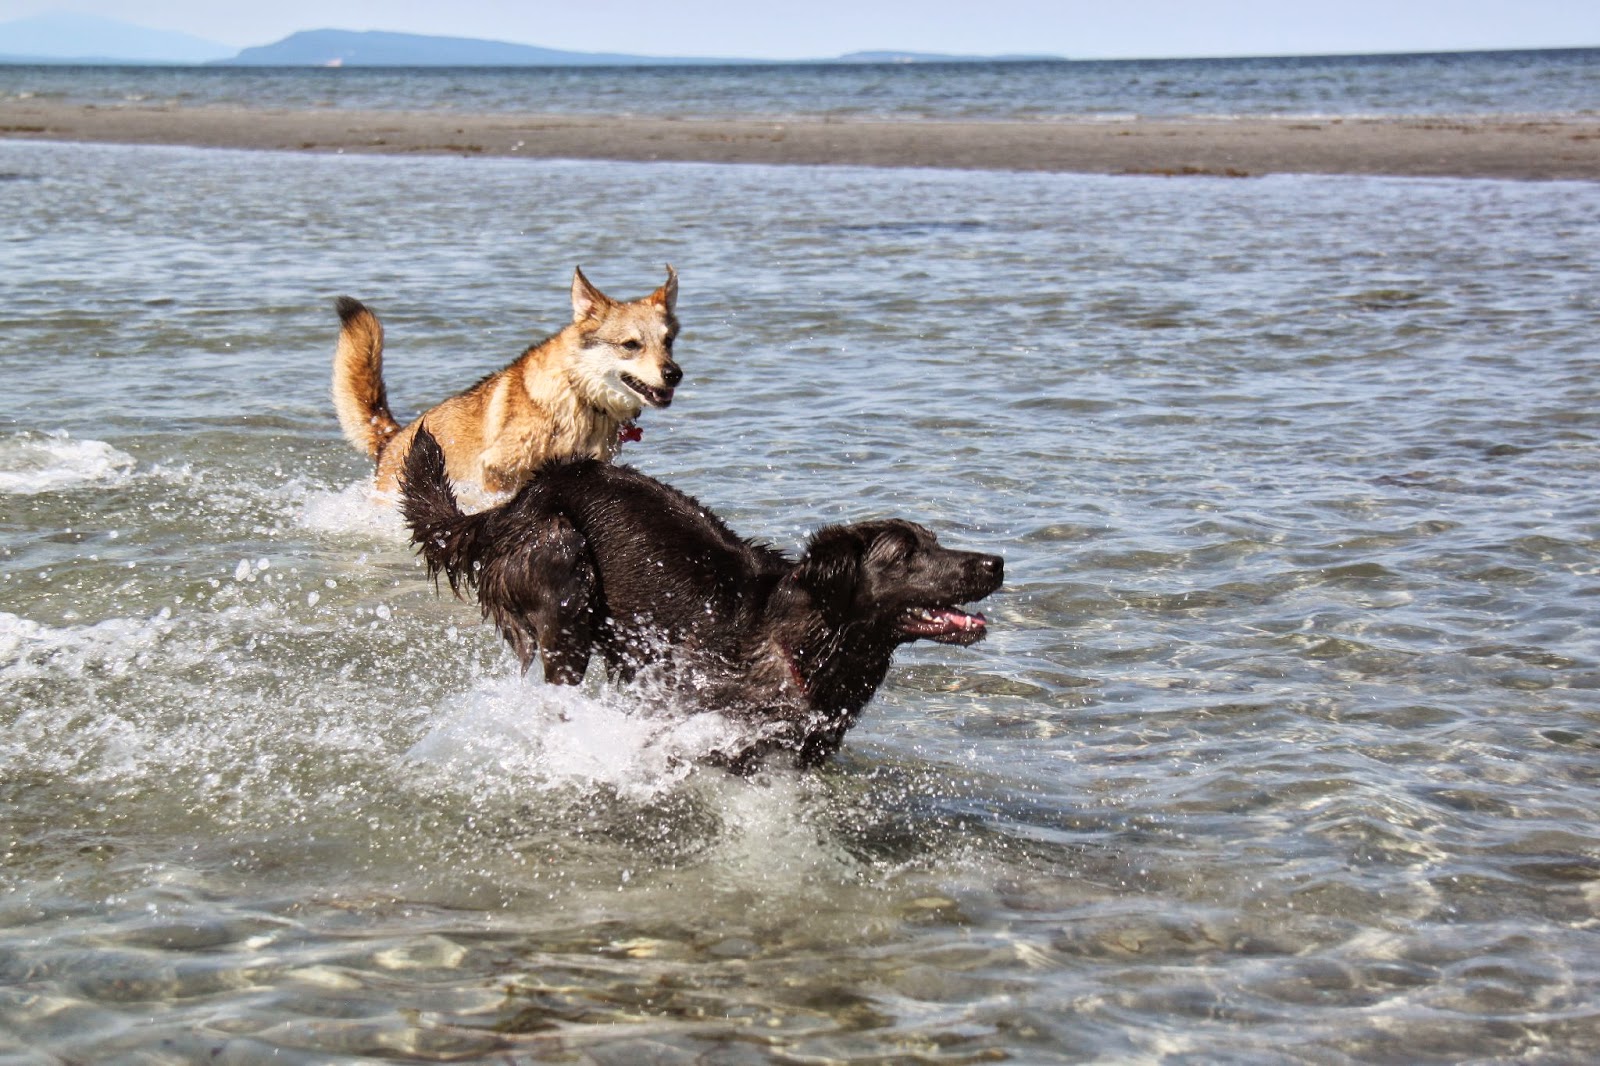 The Dog Who Sometimes Fetches: Biggest Beach Ever! (by Ojo)